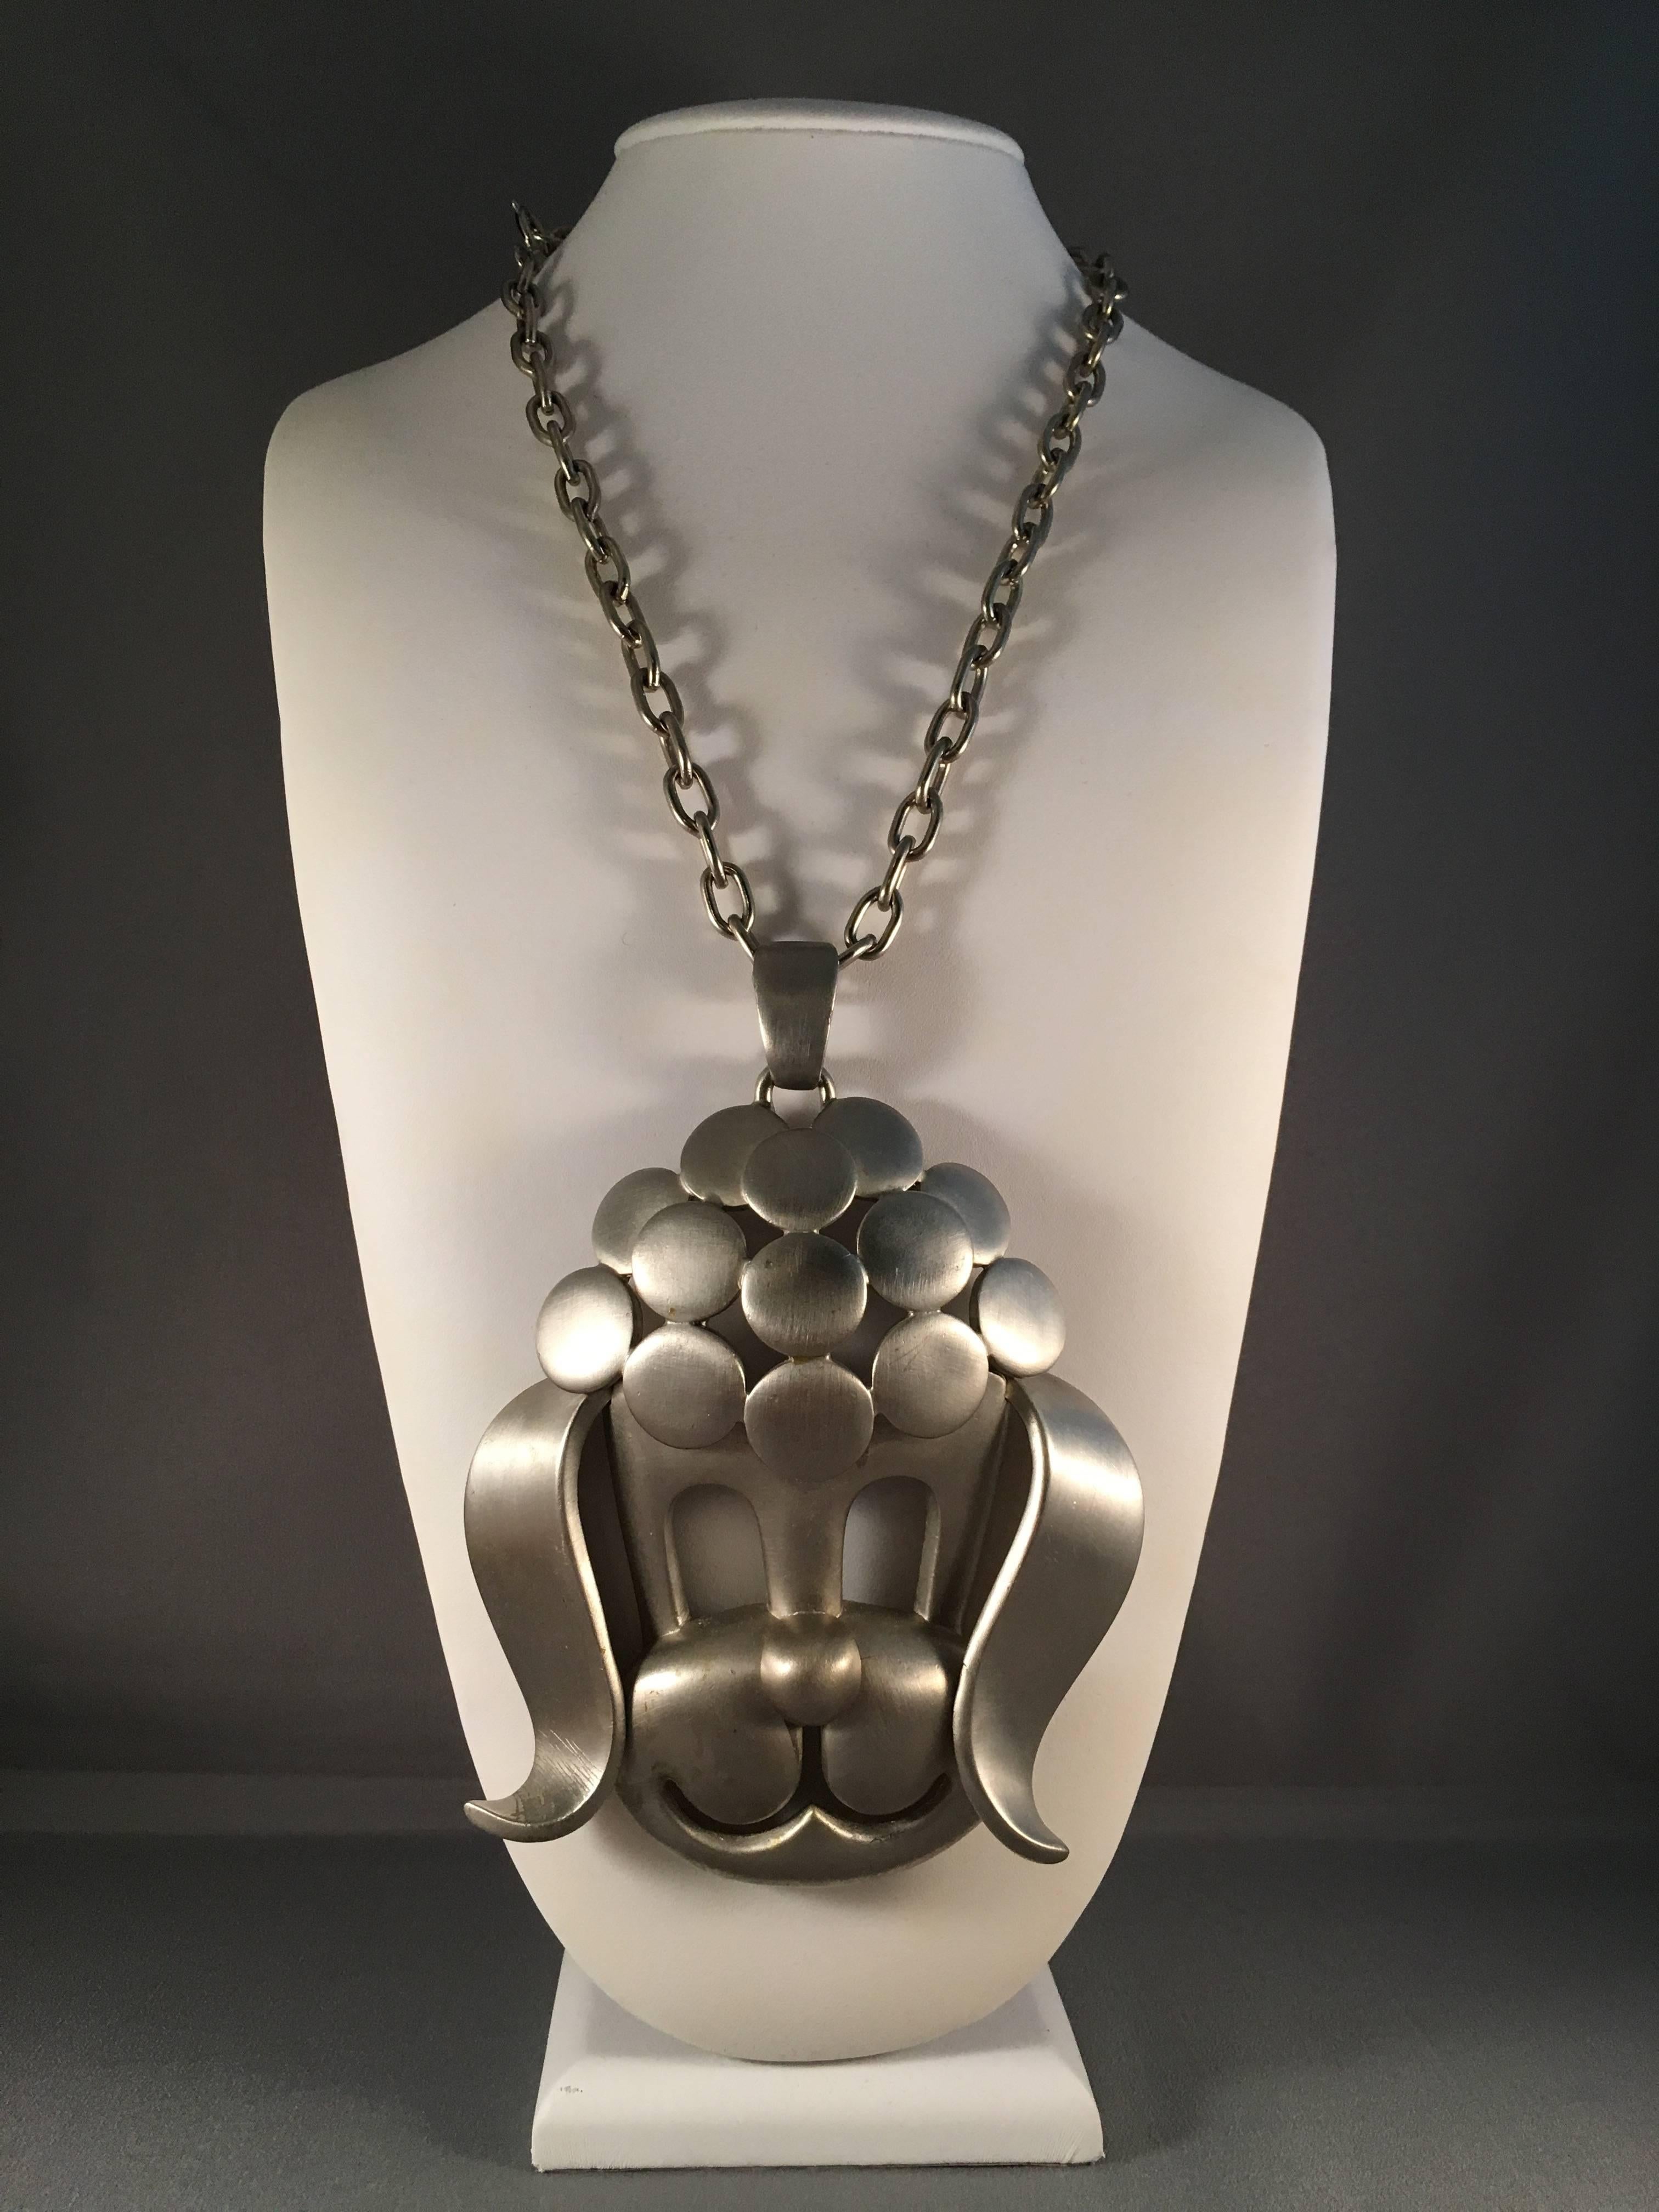 This is an amazing Pierre Cardin statement necklace from the 1960s. It features  a huge mod poodle pendant measuring 5 1/4" long x 4 3/8" wide on a 21" long silvertone chain. Image #3 shows the pendant in comparison to a quarter so